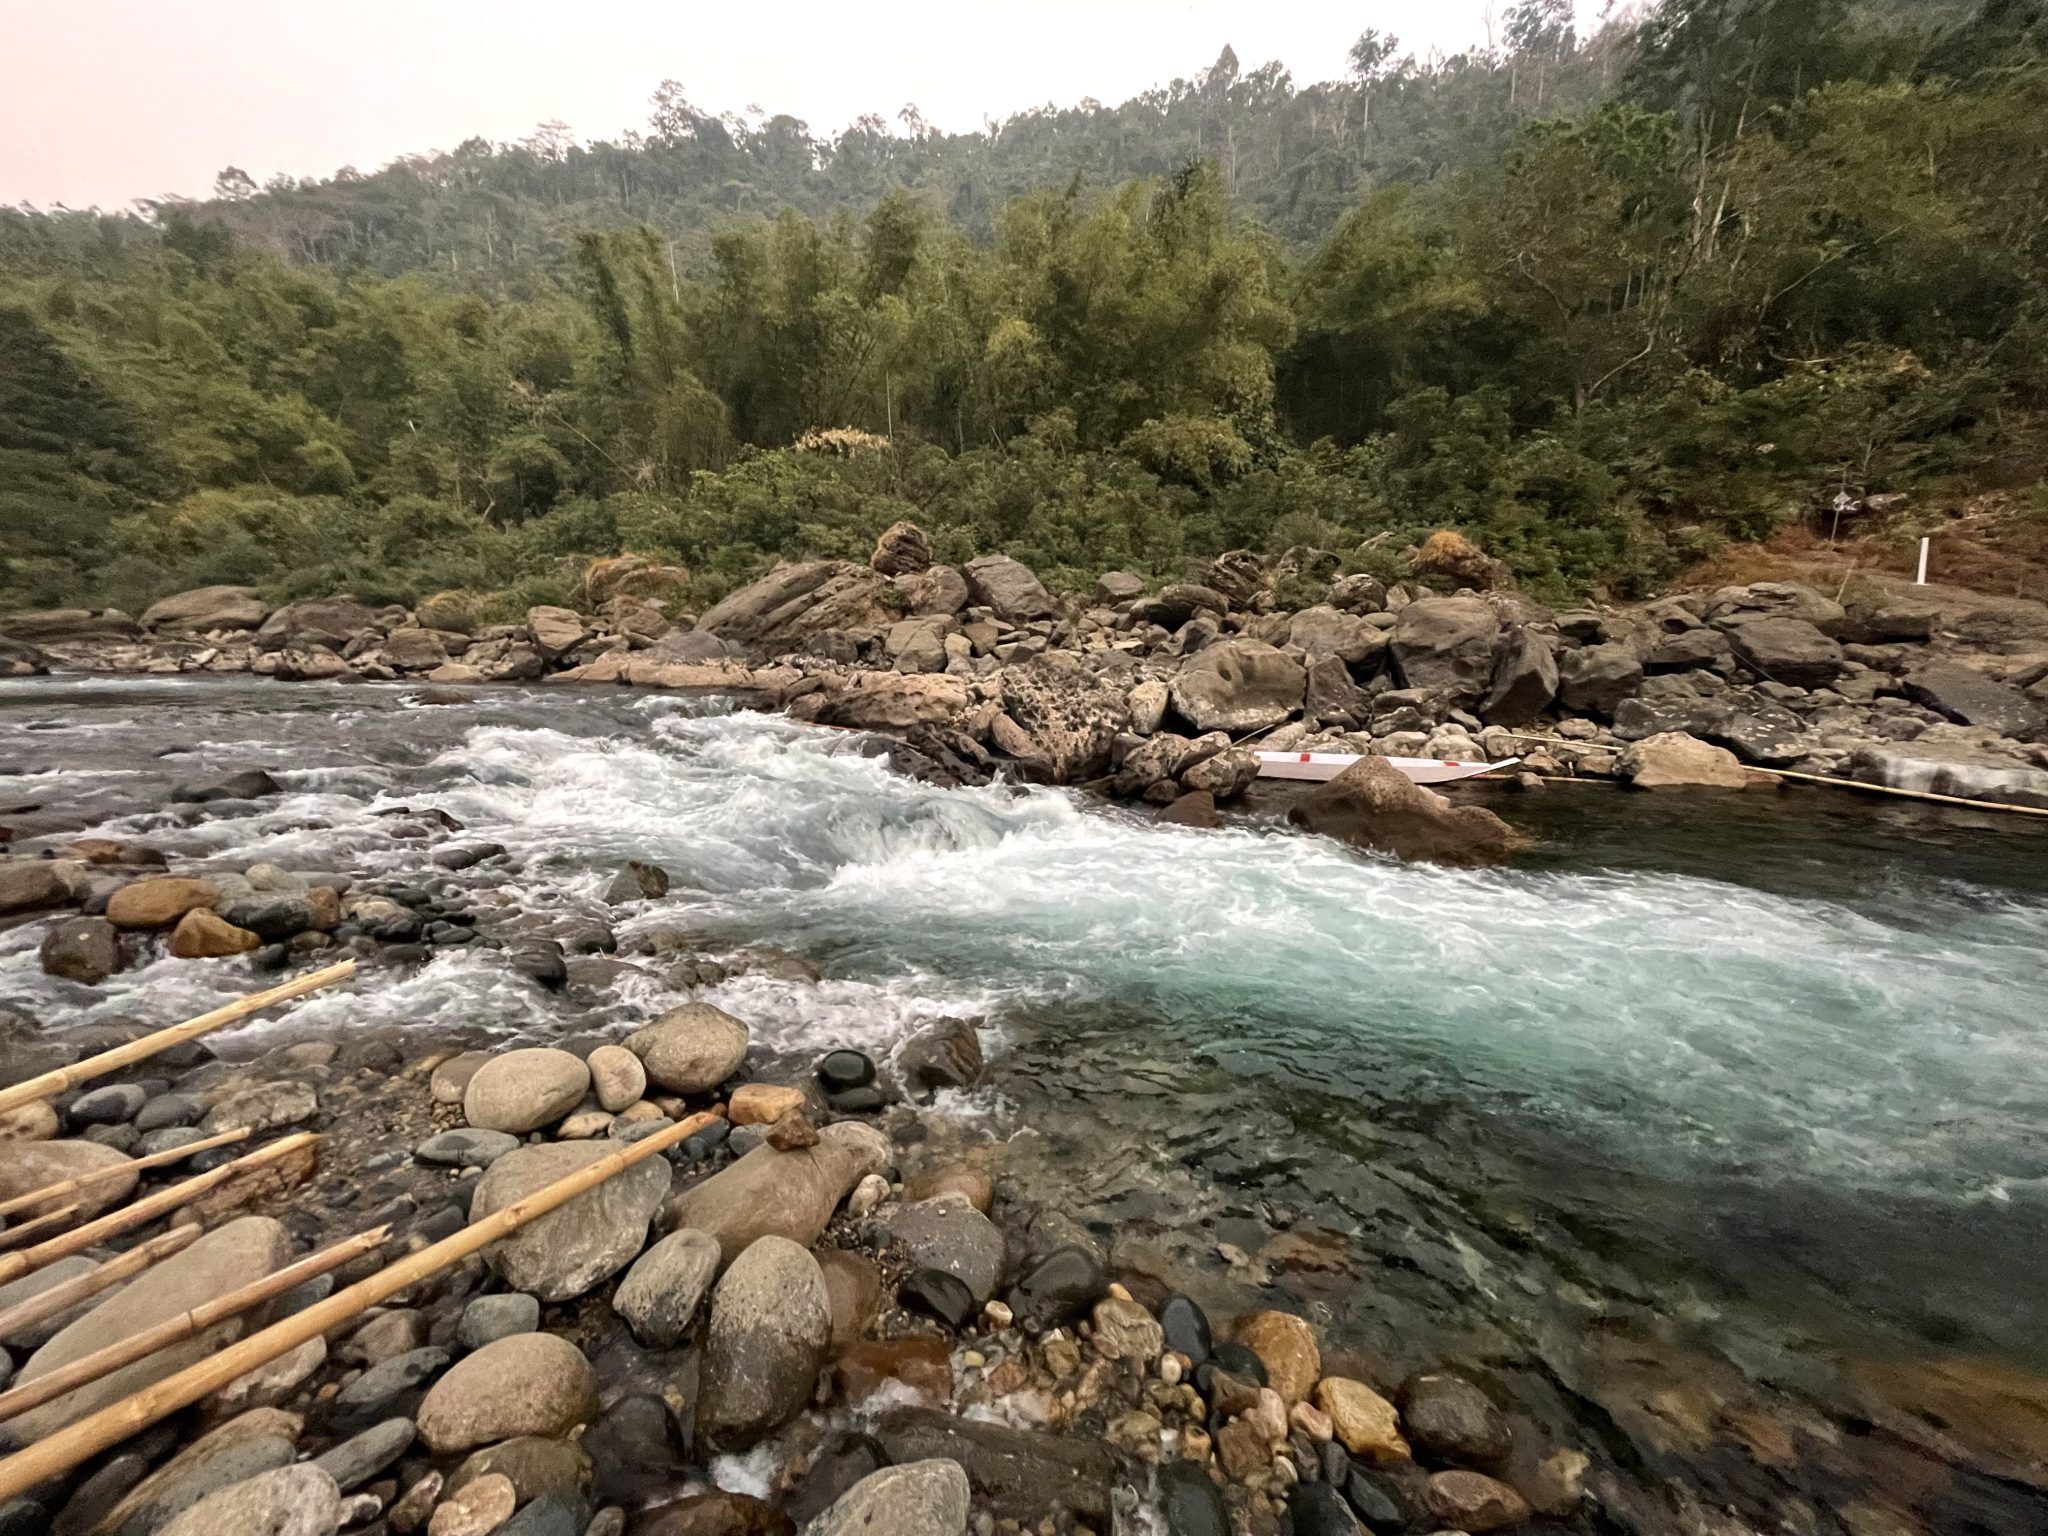 A stream in Umngot river @ Dawki, Meghalaya after sunset. This river is one of the cleanest river in India.